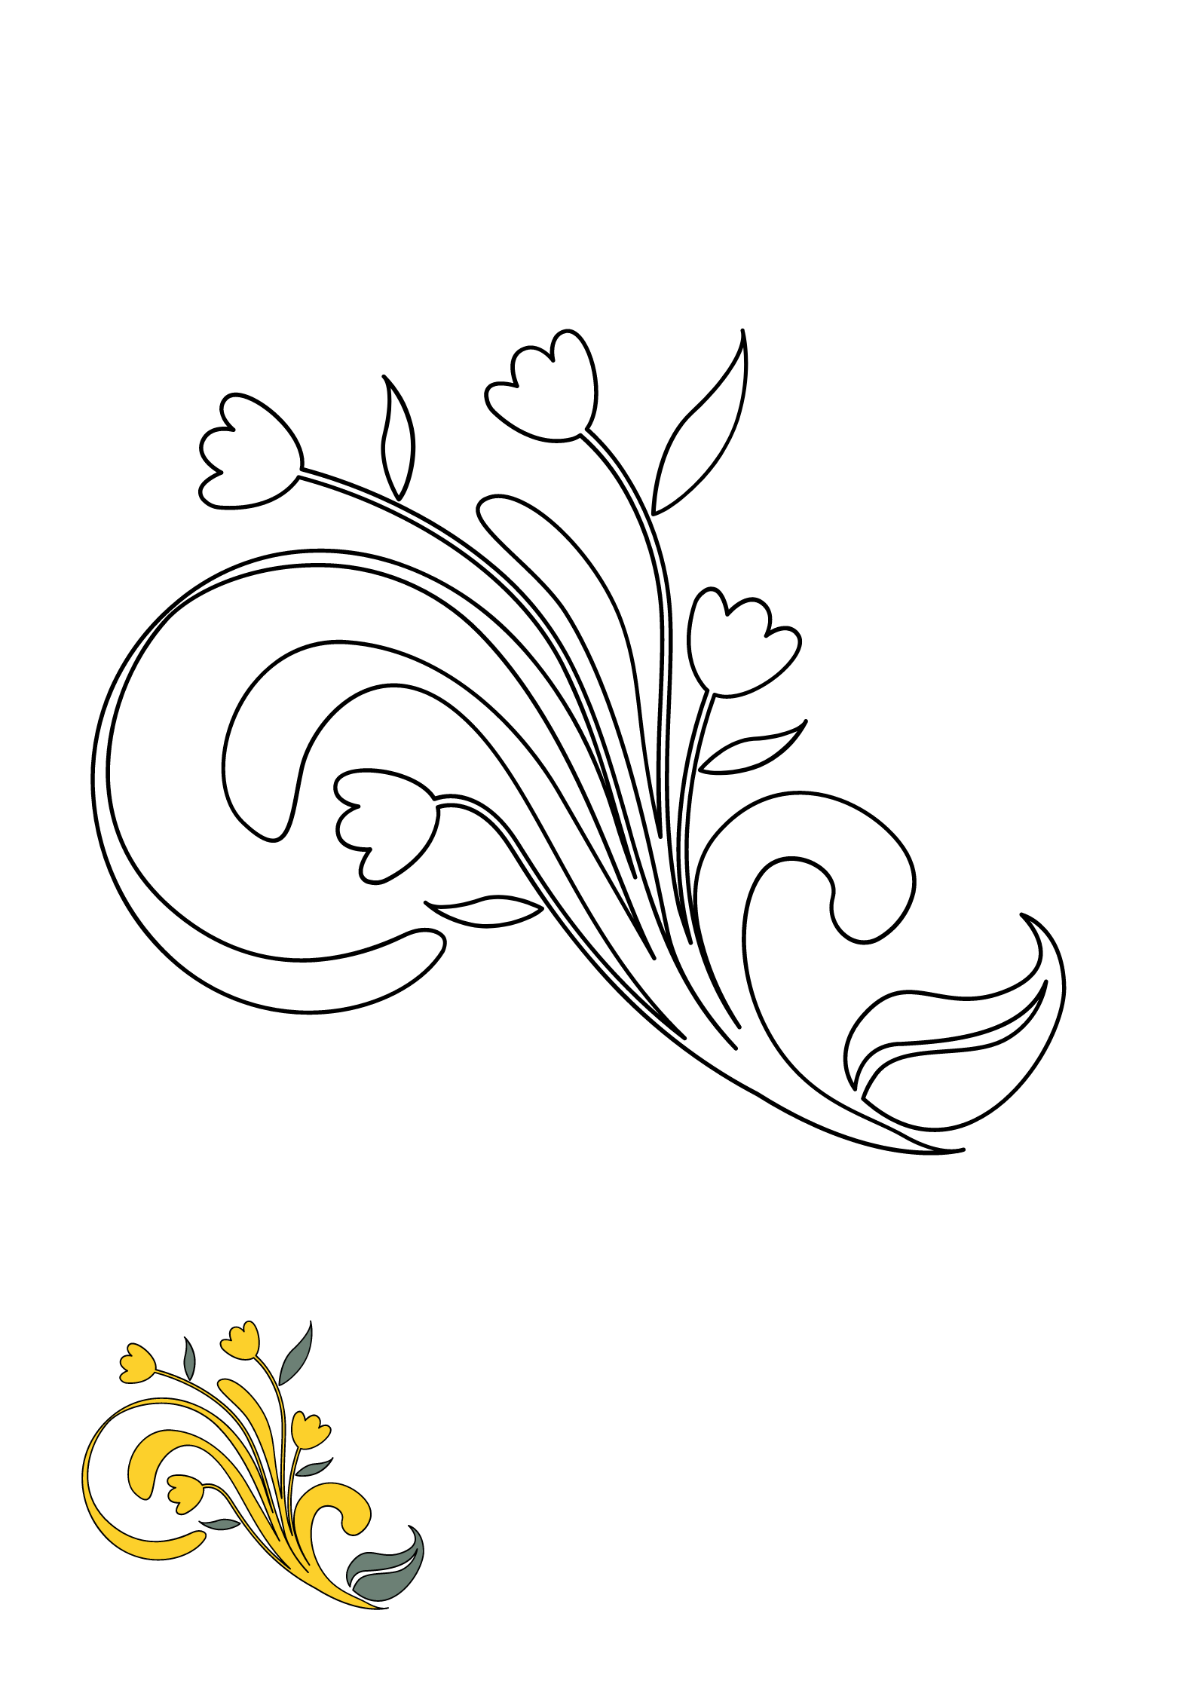 Floral Swirl Coloring Page Template